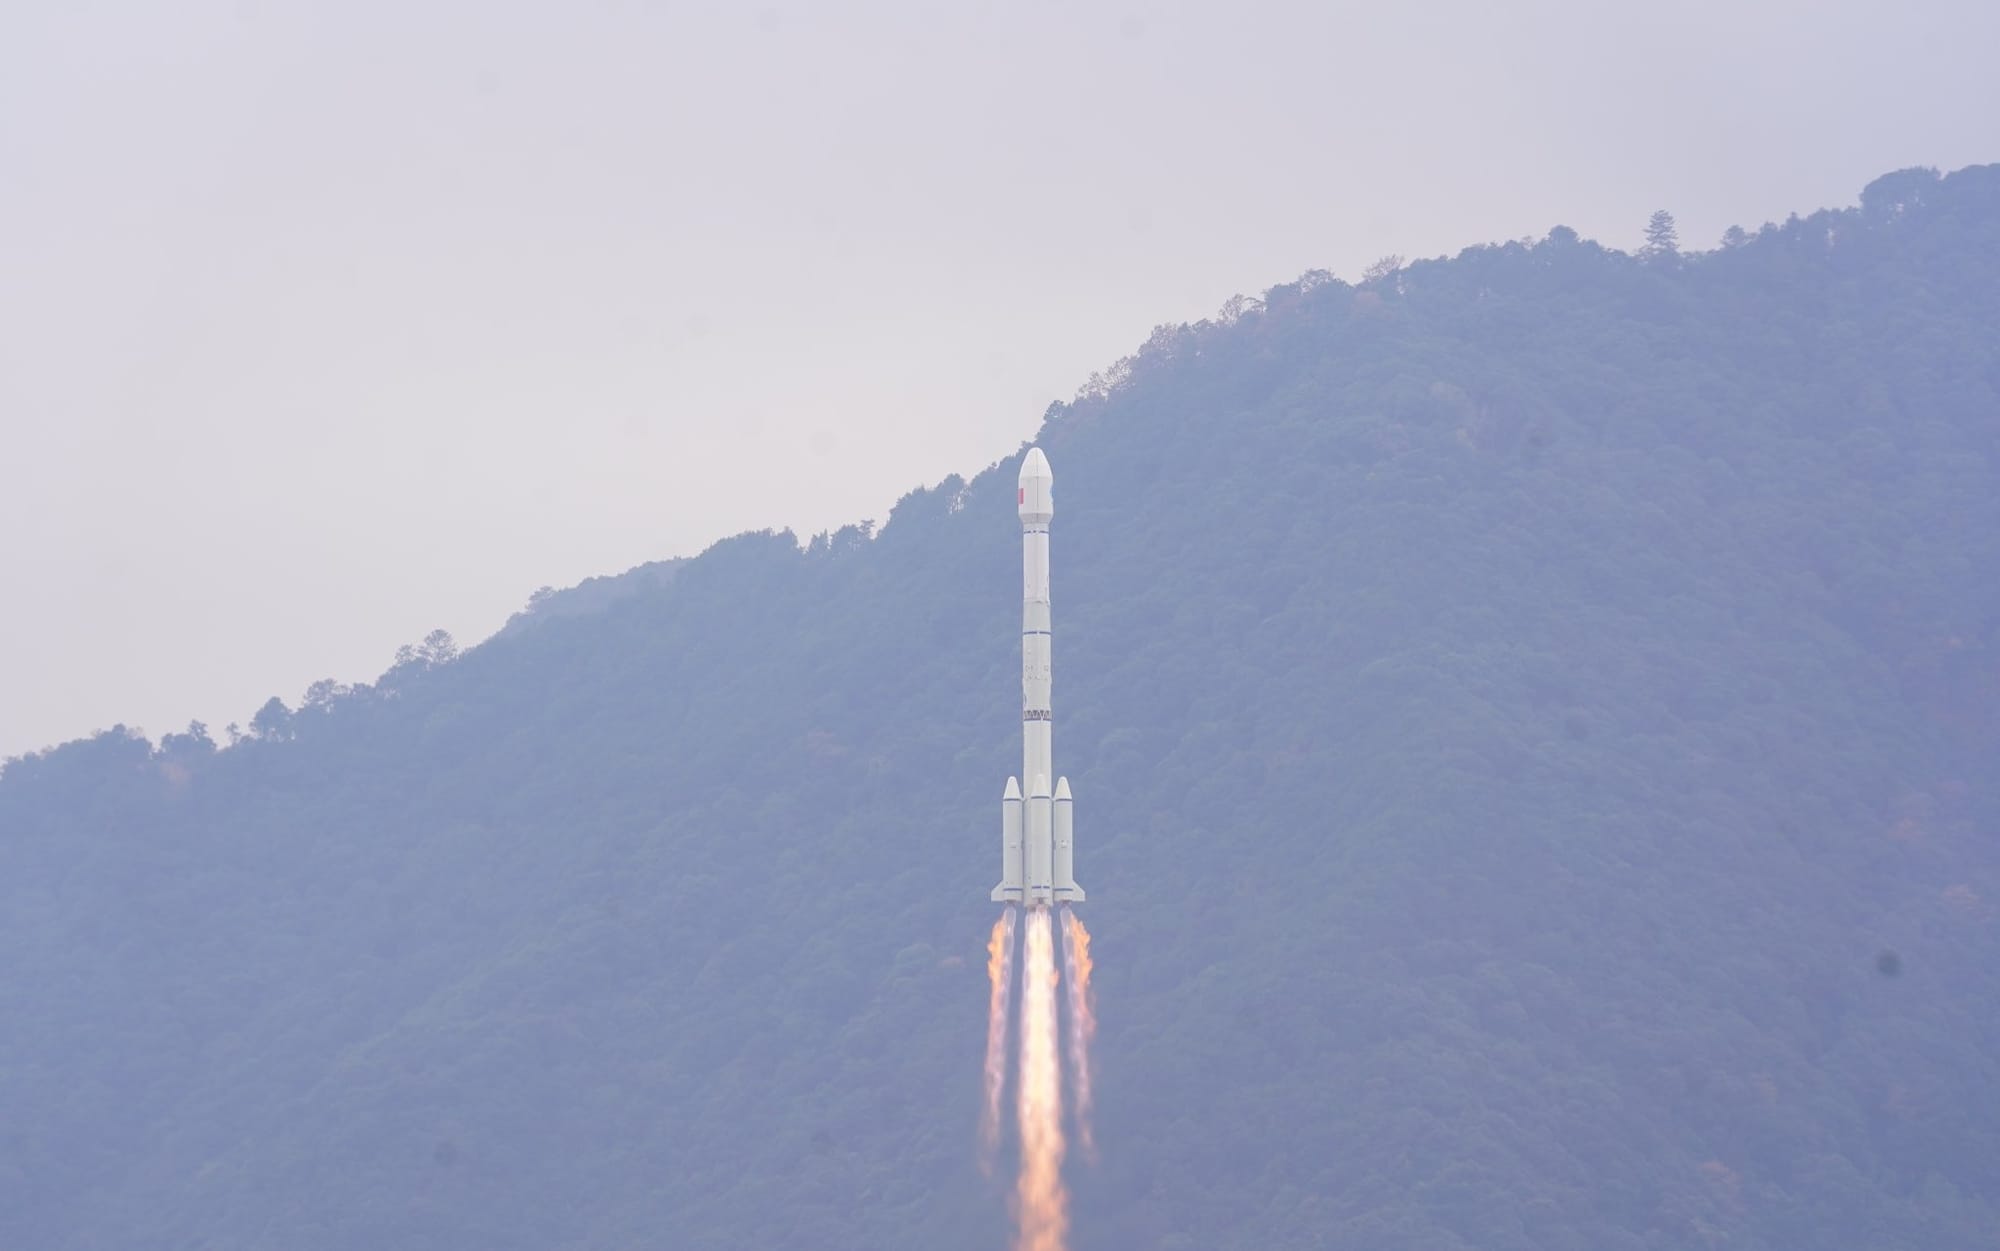 Long March 3B lifting off from its launch pad at the Xichang Satellite Launch Center with Beidou-3 M25 & M26.